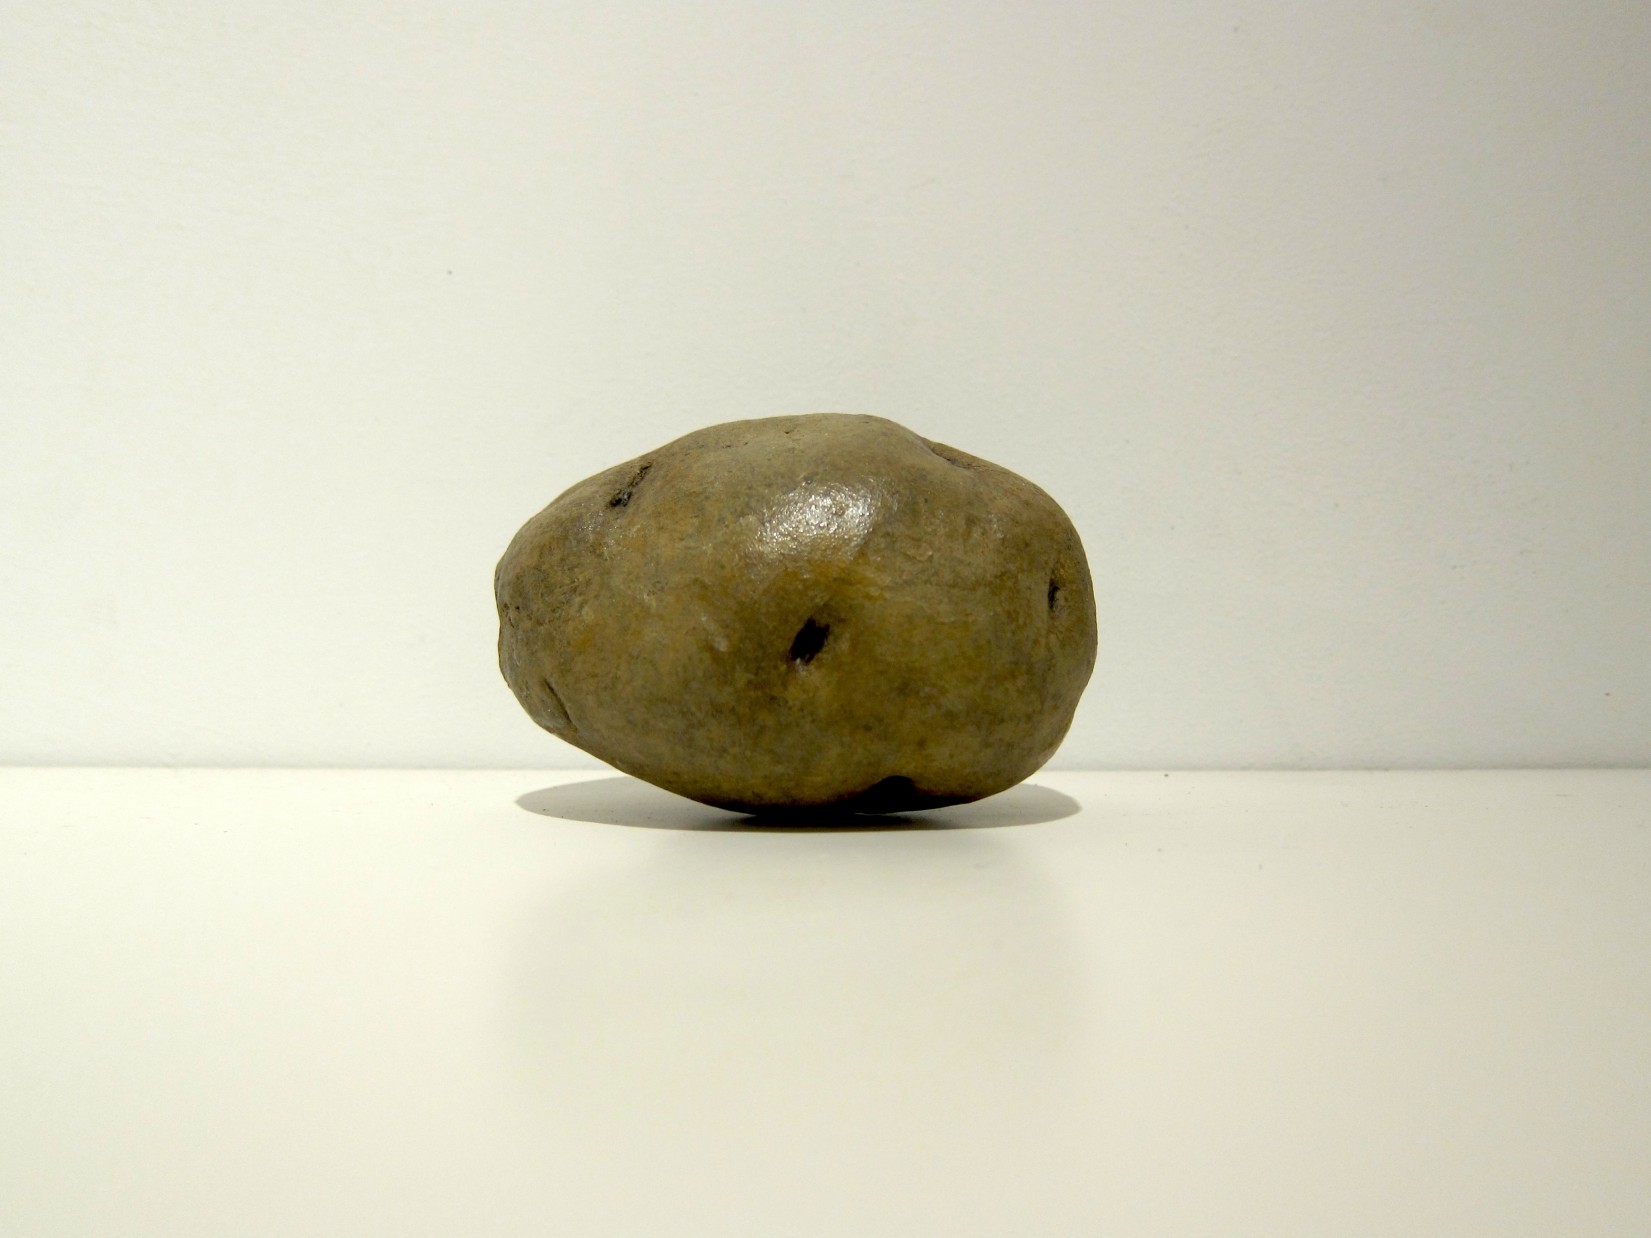 Margaret Lee, Wall Potato, plaster and acrylic paint